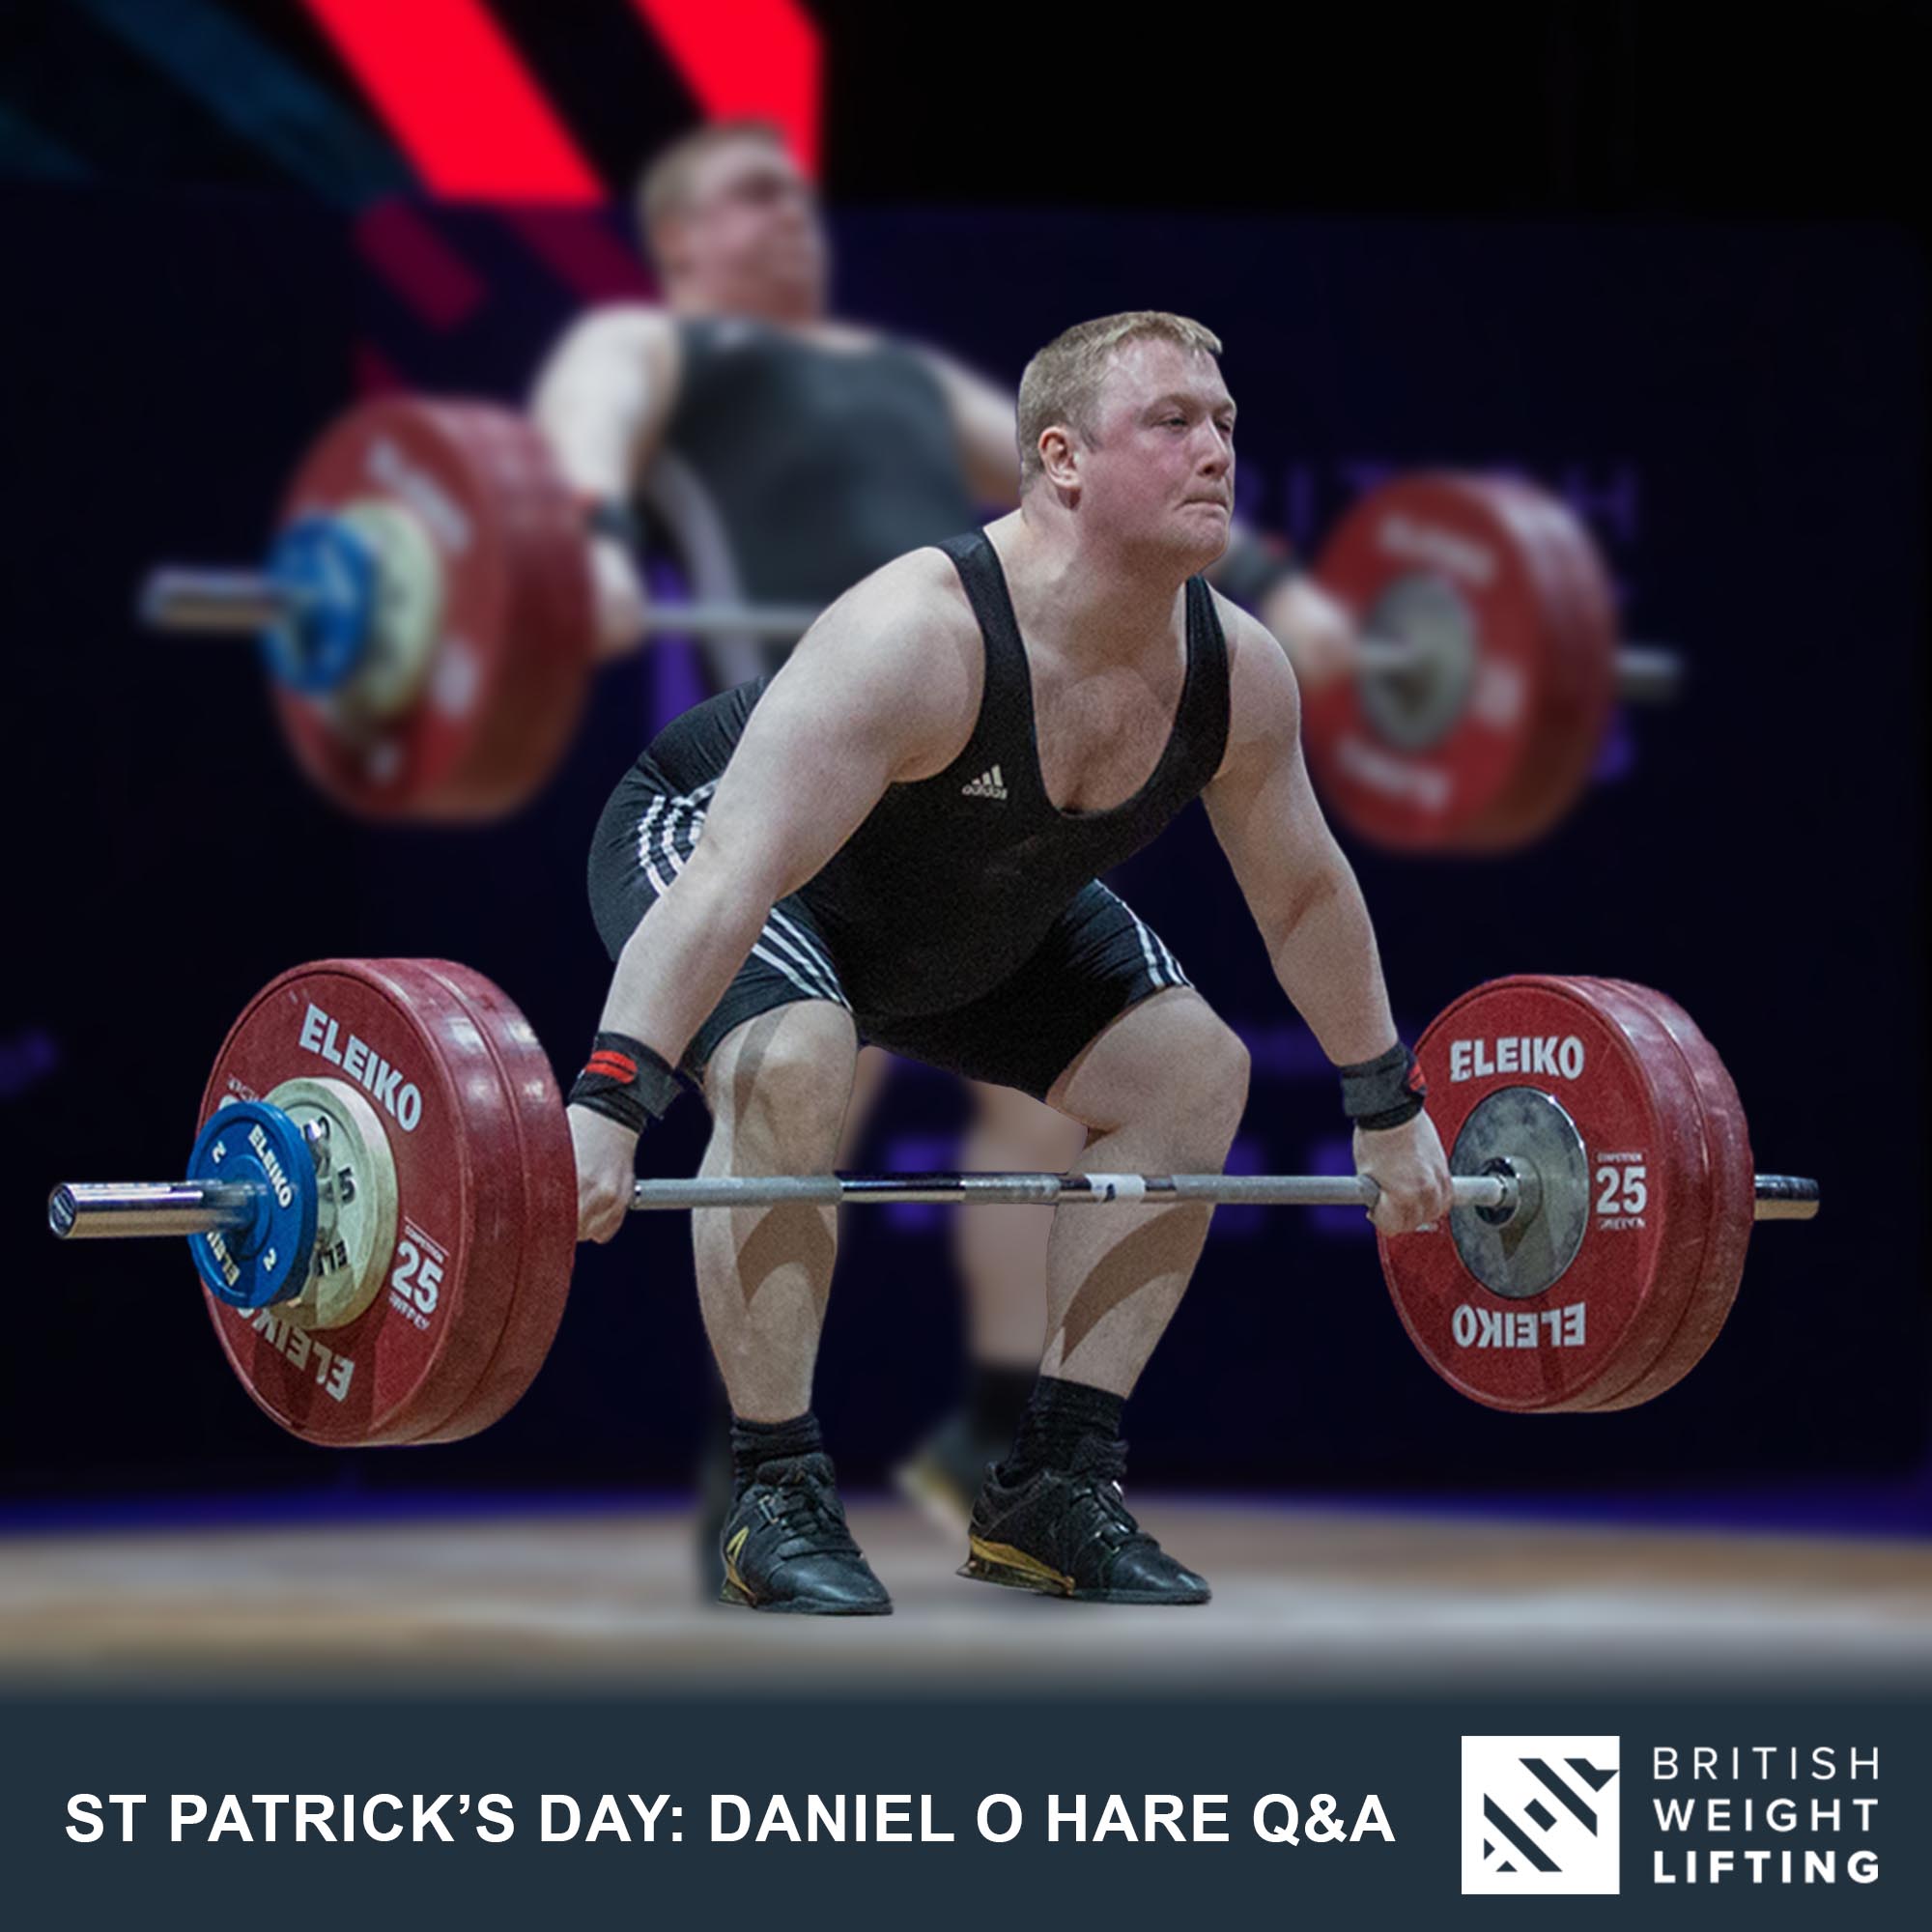 St Patricks Day Q&A with athlete Daniel O Hare